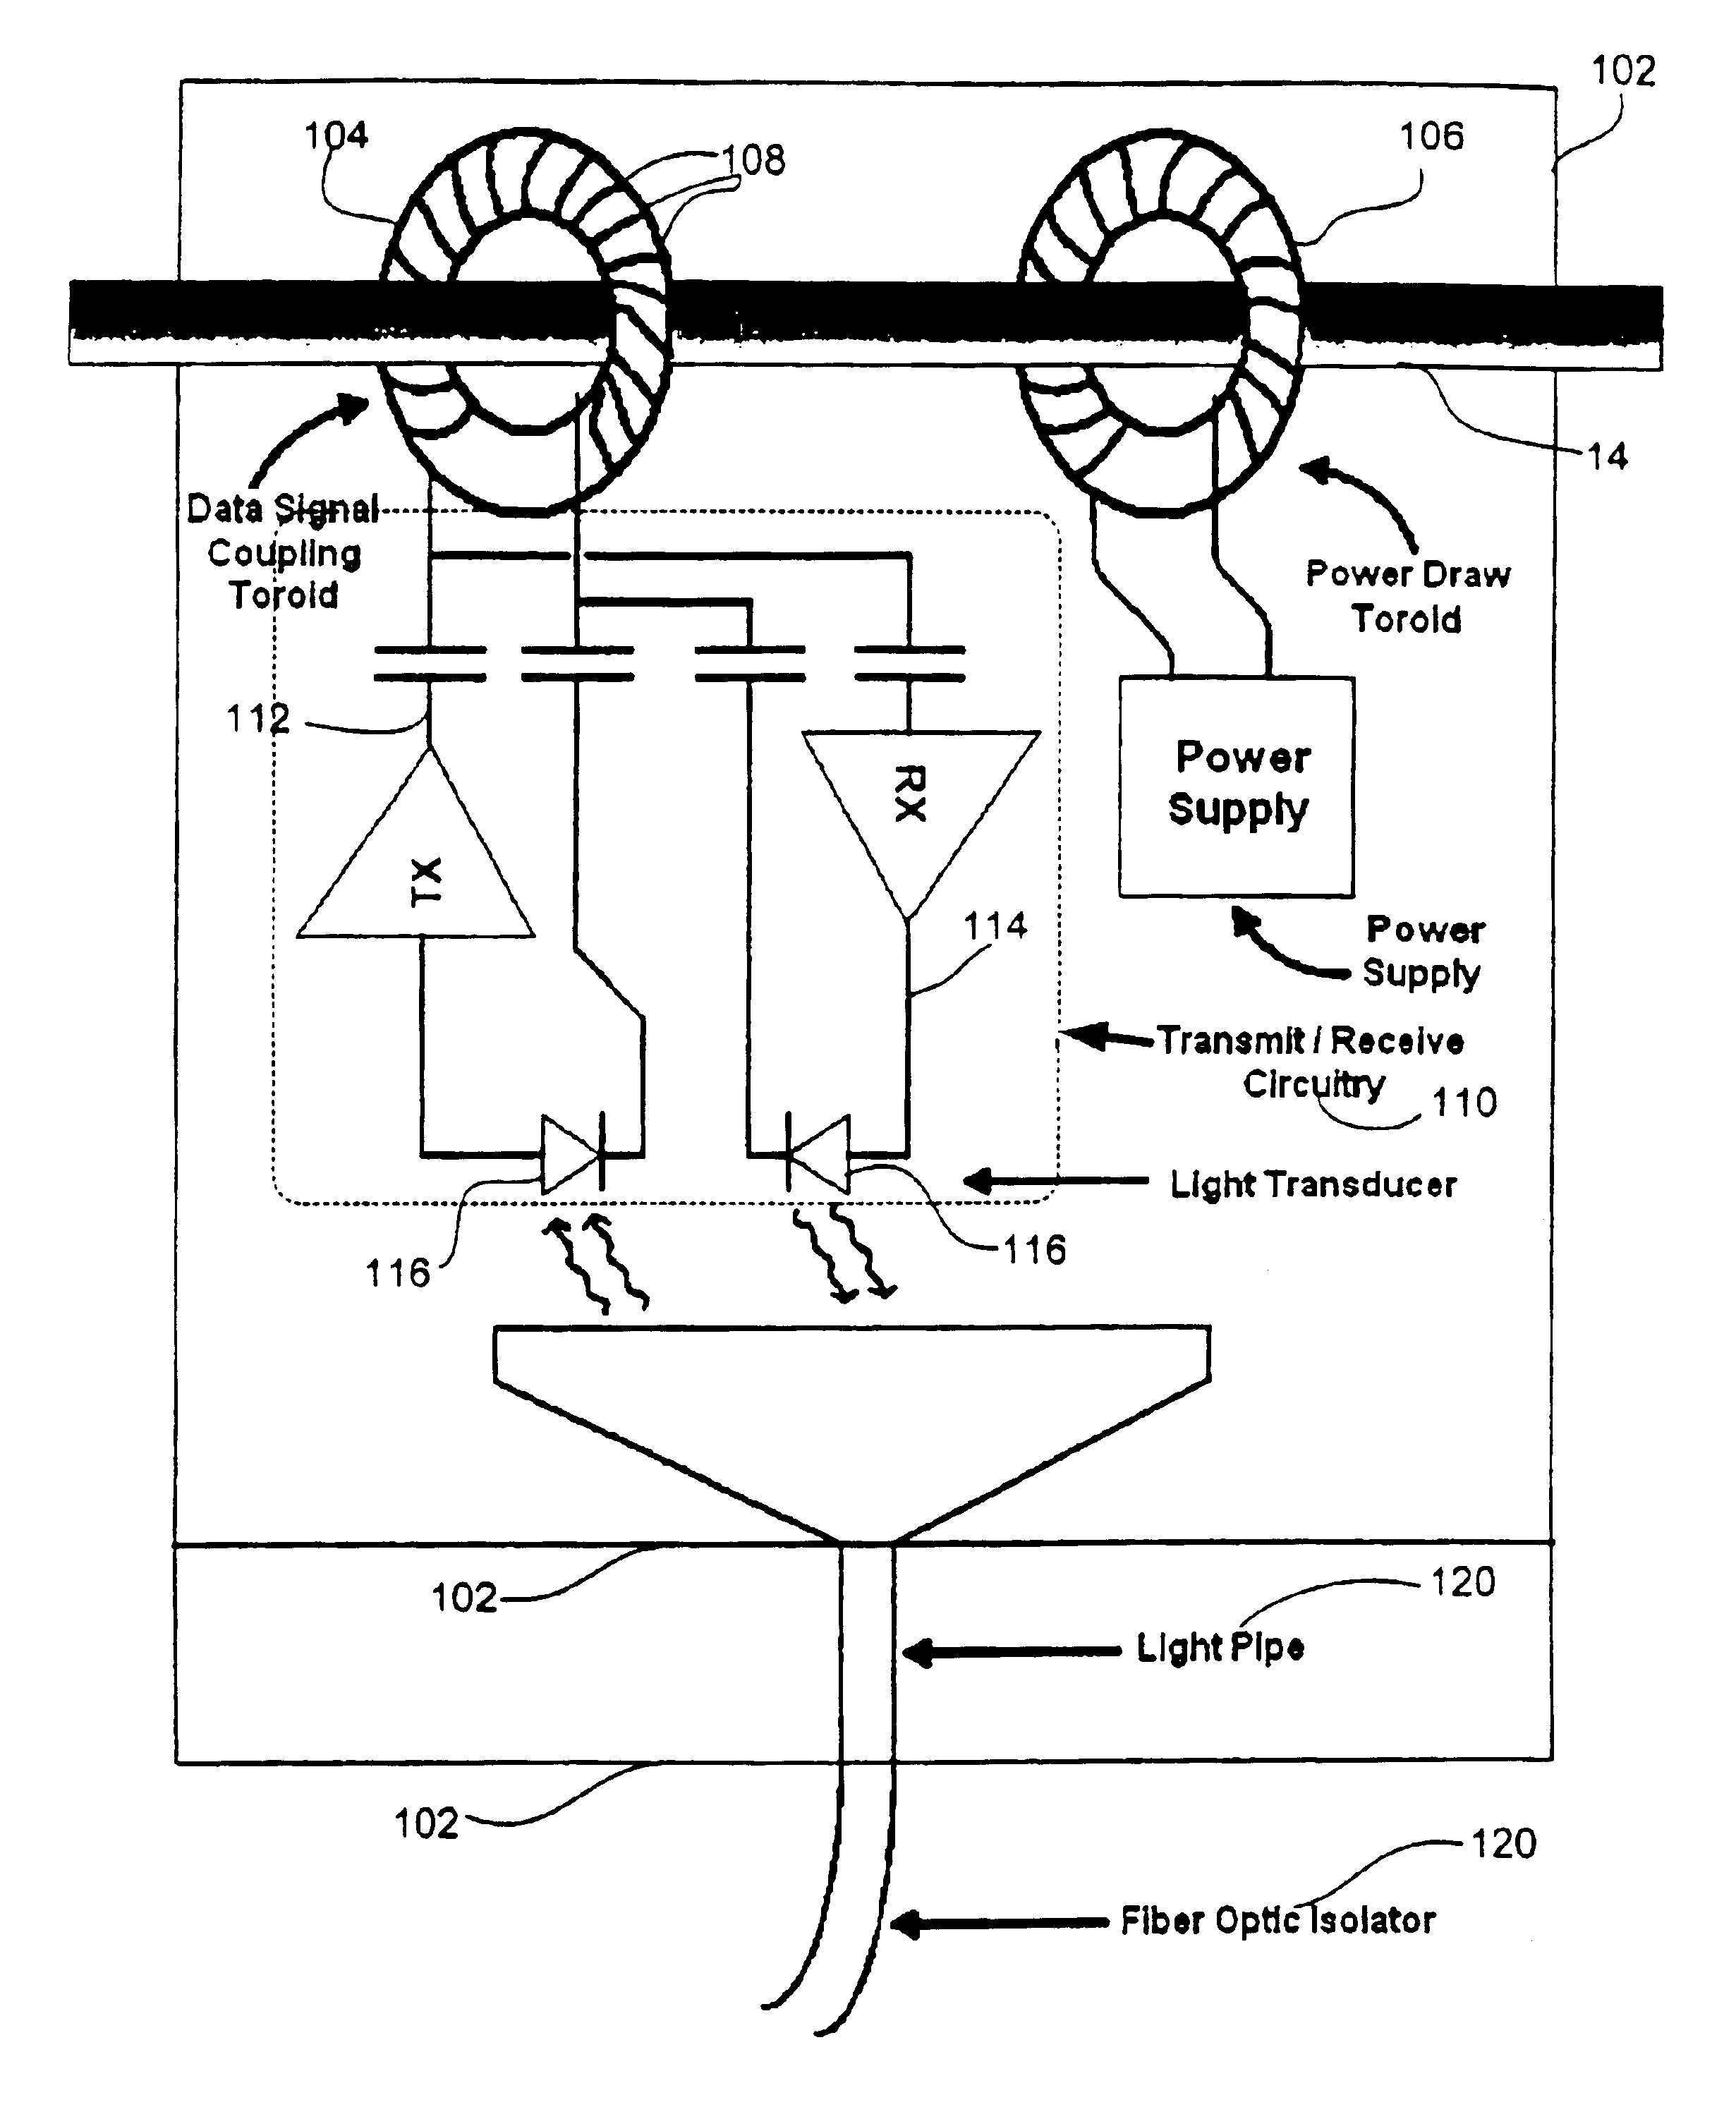 Method and apparatus for providing inductive coupling and decoupling of high-frequency, high-bandwidth data signals directly on and off of a high voltage power line